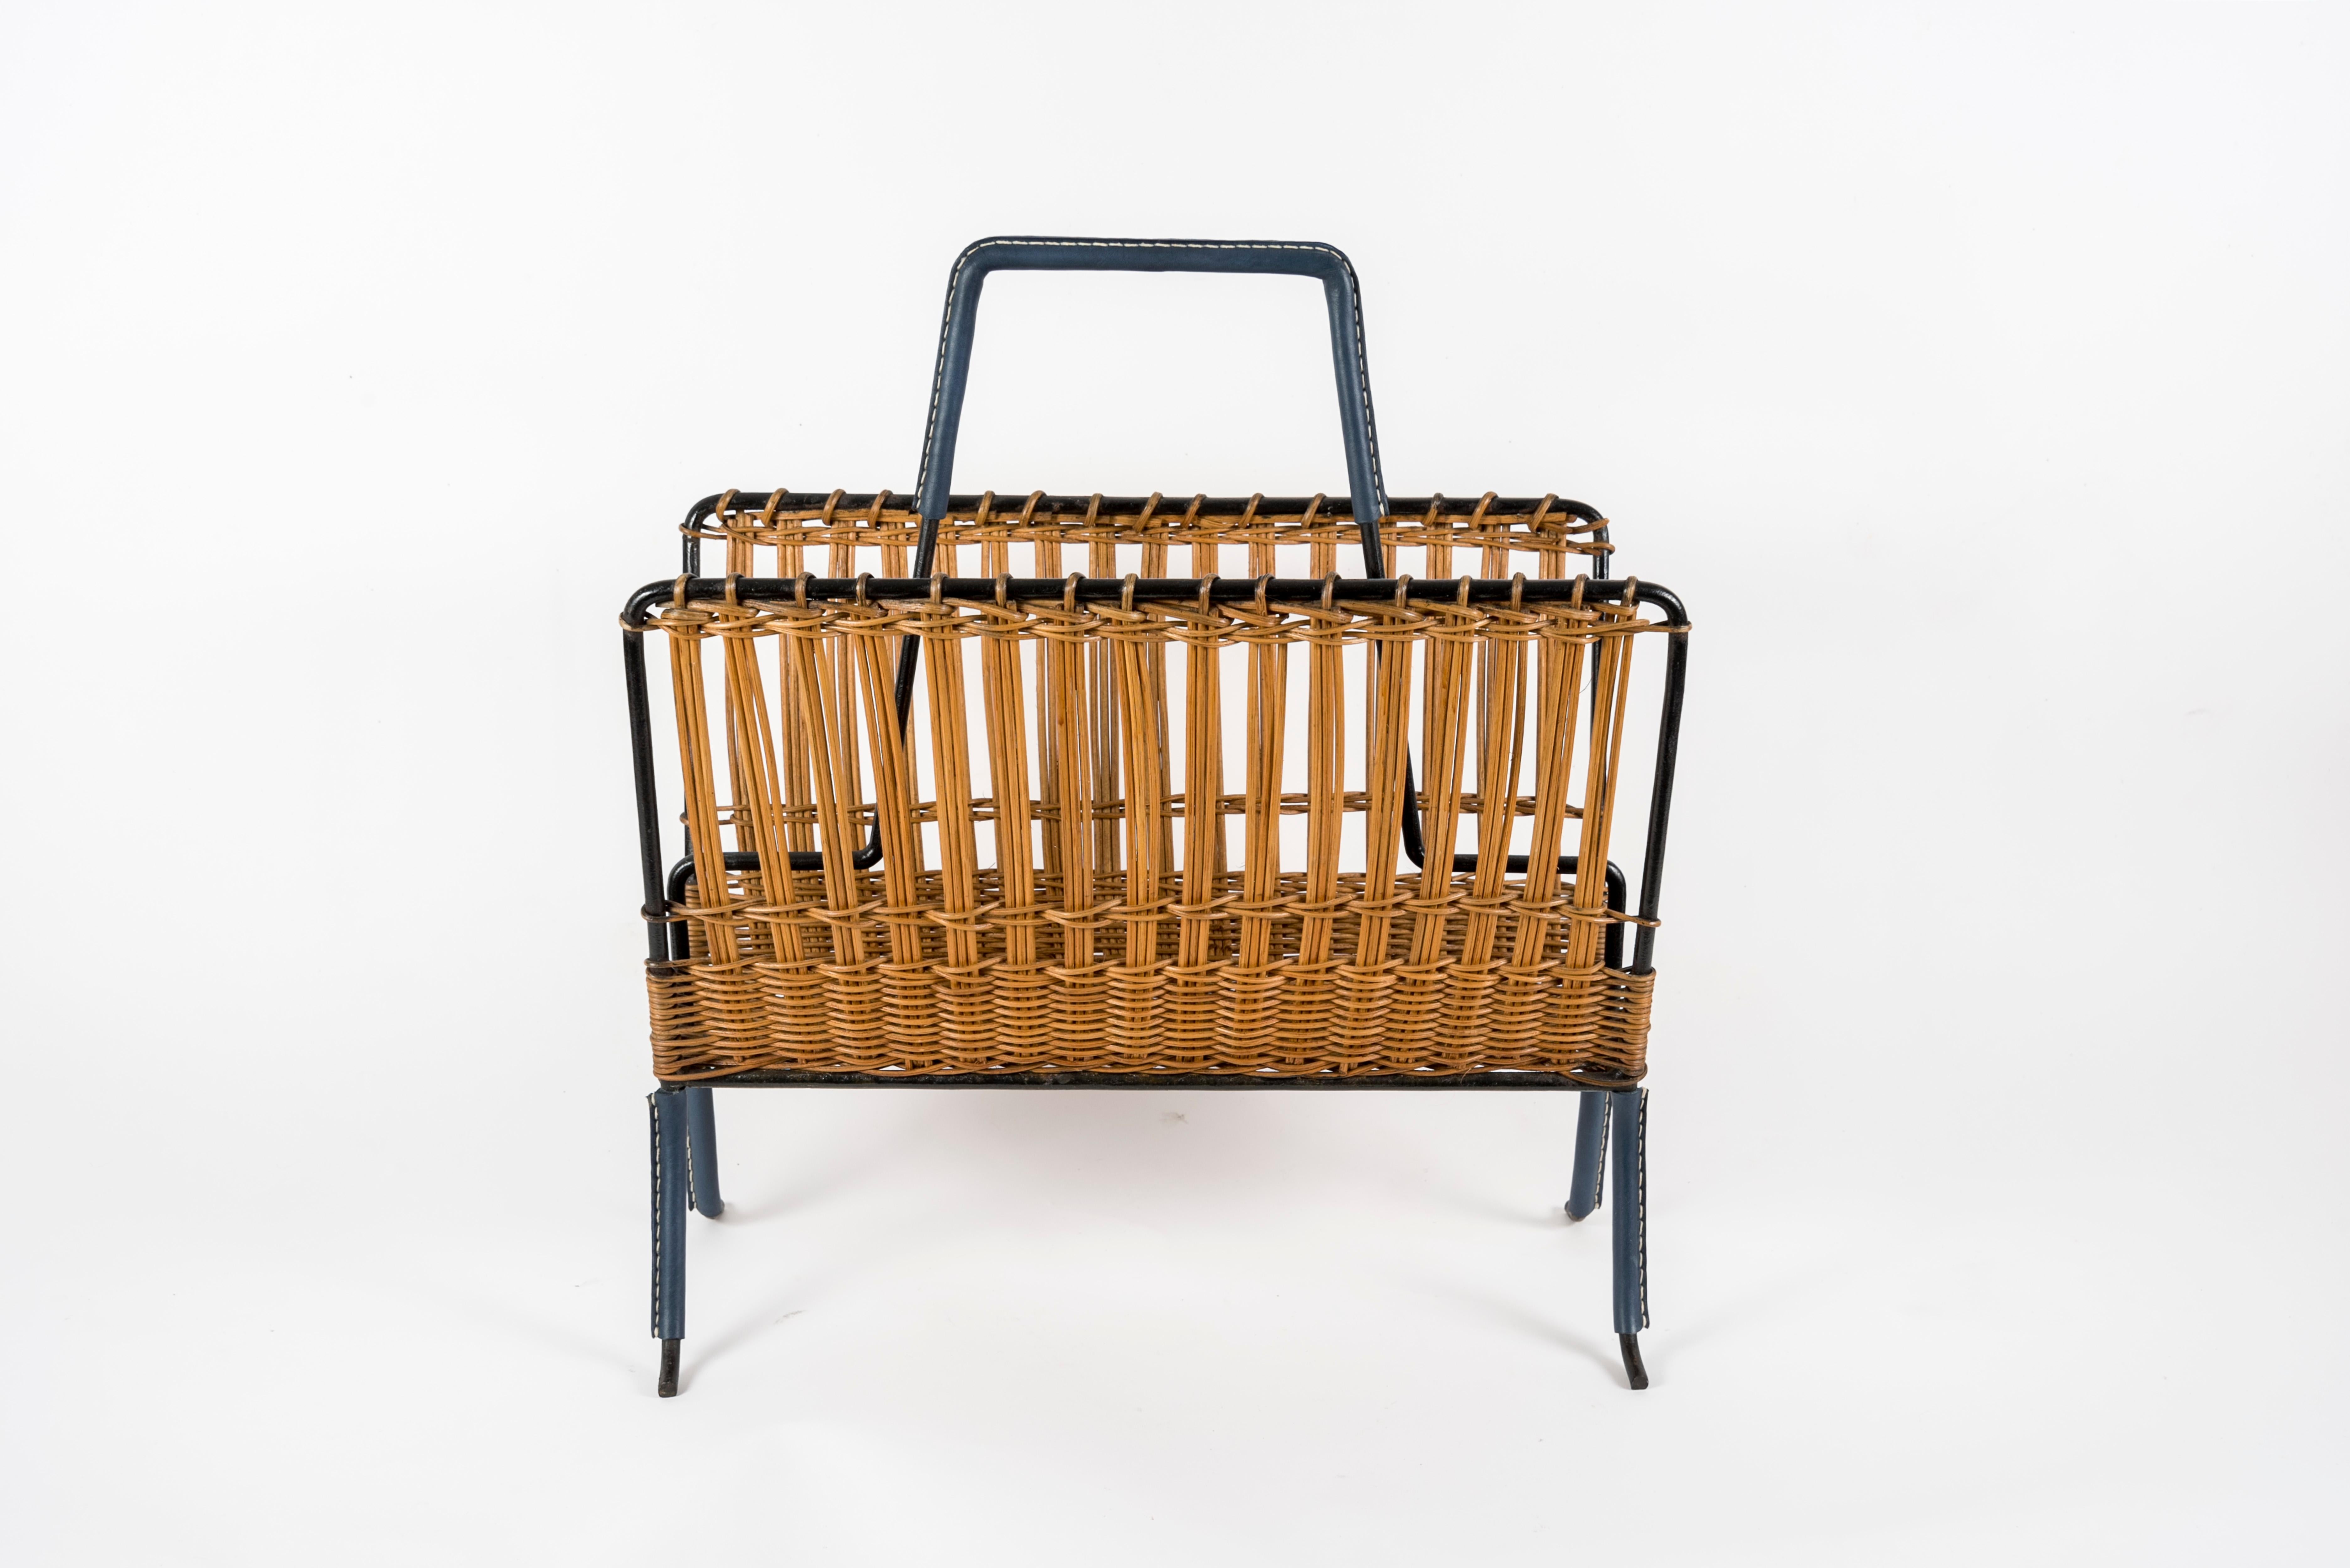 European 1950s Stitched Leather and Rattan Magazine Rack by Jacques Adnet